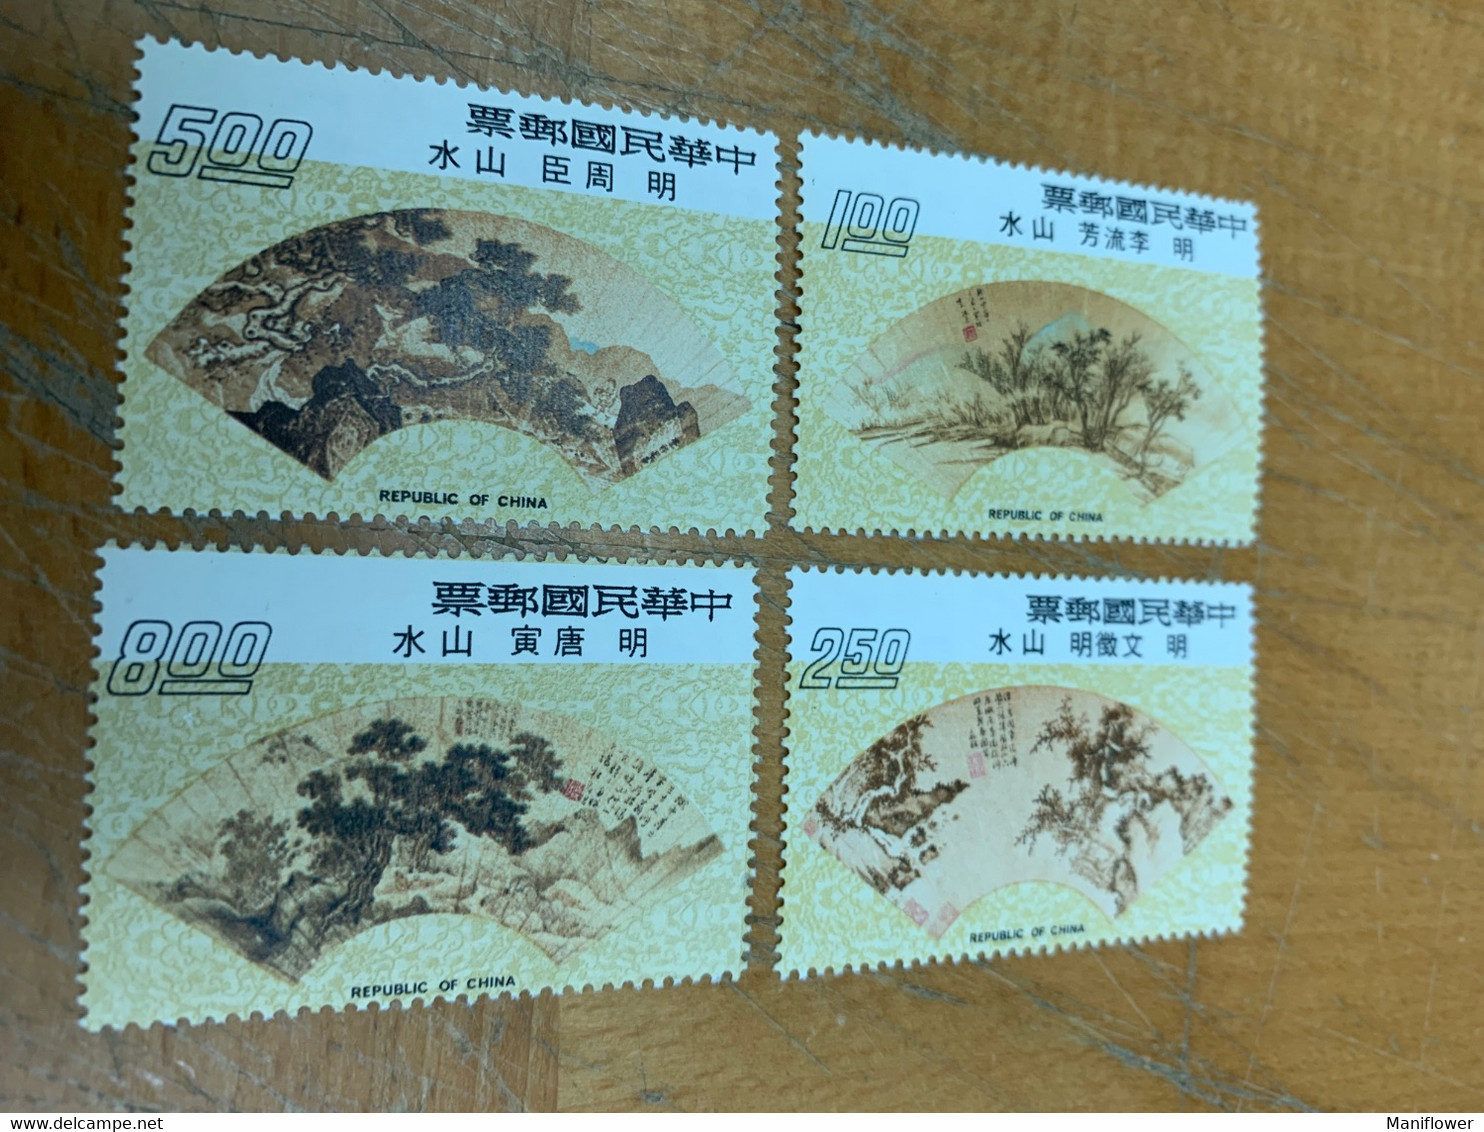 Taiwan Stamp Fan Paintings 4v MNH - Covers & Documents